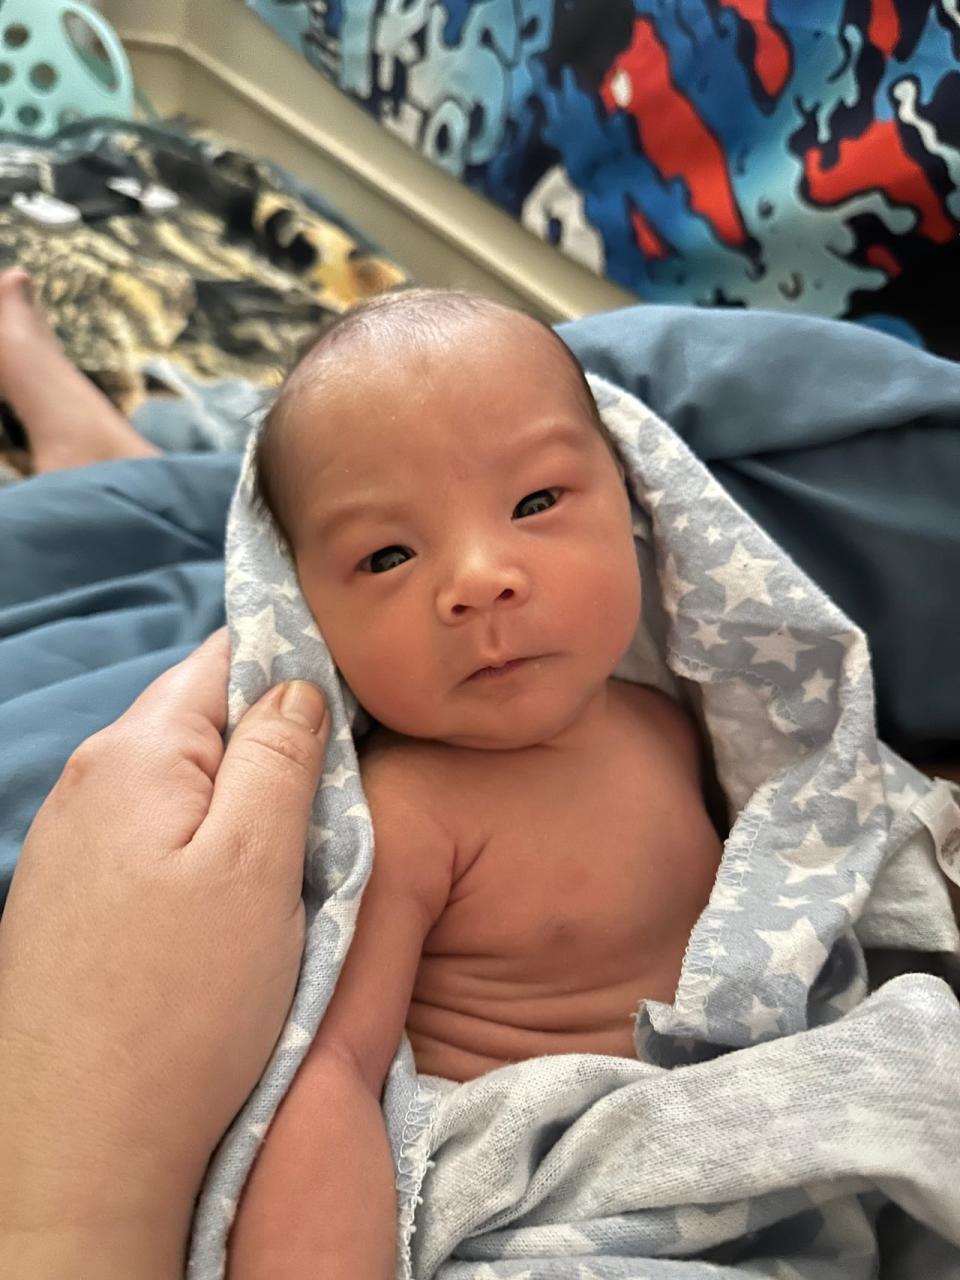 Caitlin Klengenbern said Jamie Shepherd Sapotiatuk Klengenberg-Felix was born at the Inuvik Regional Hospital at 7:05 p.m. on January 2. (Submitted by Caitlin Klengenberg - image credit)